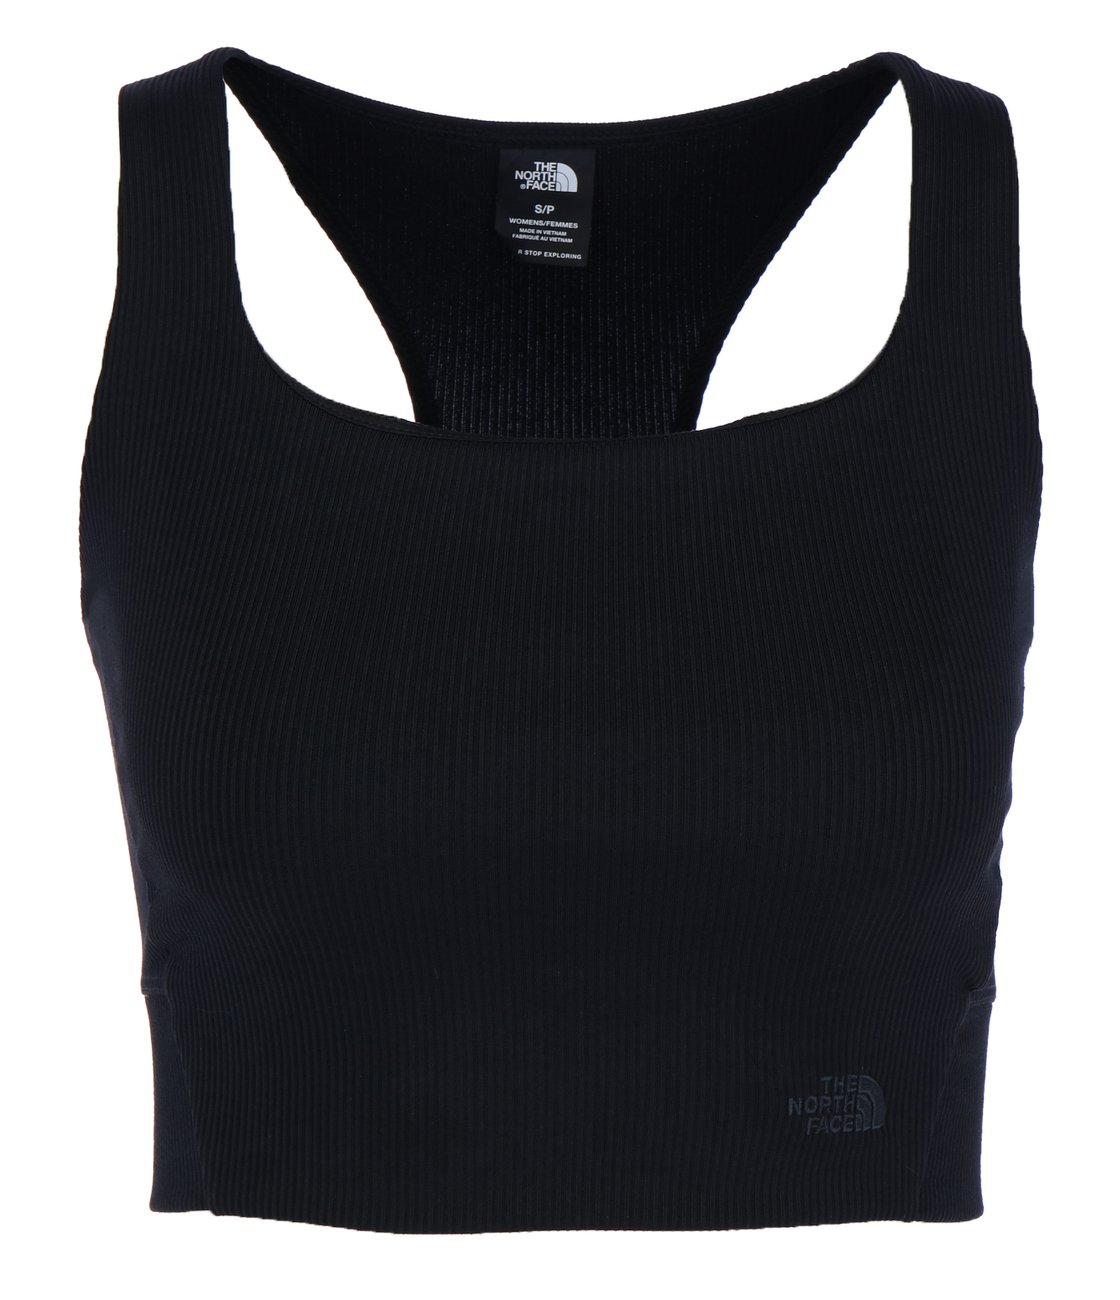 THE NORTH FACE W ACTIVE TRAIL RUBY HILL Damen Tank Top - The North Face - SAGATOO - 195439182127